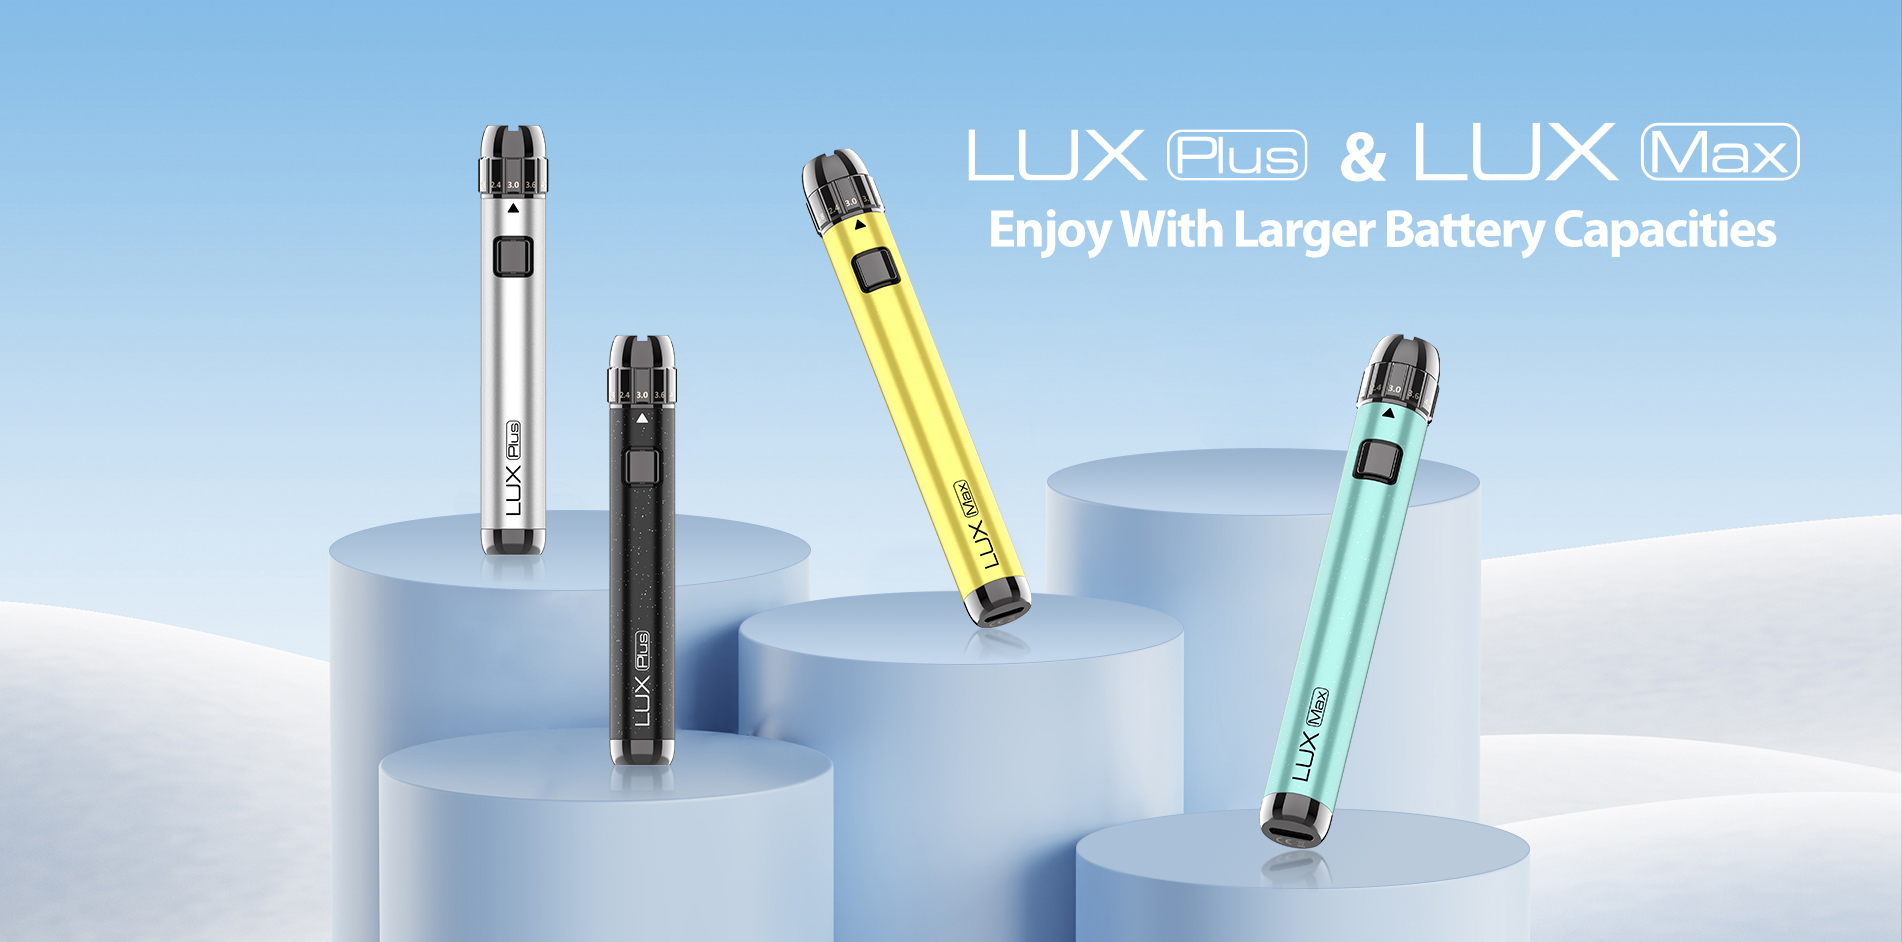 Yocan Lux Series, enjoy with larger battery capacities,